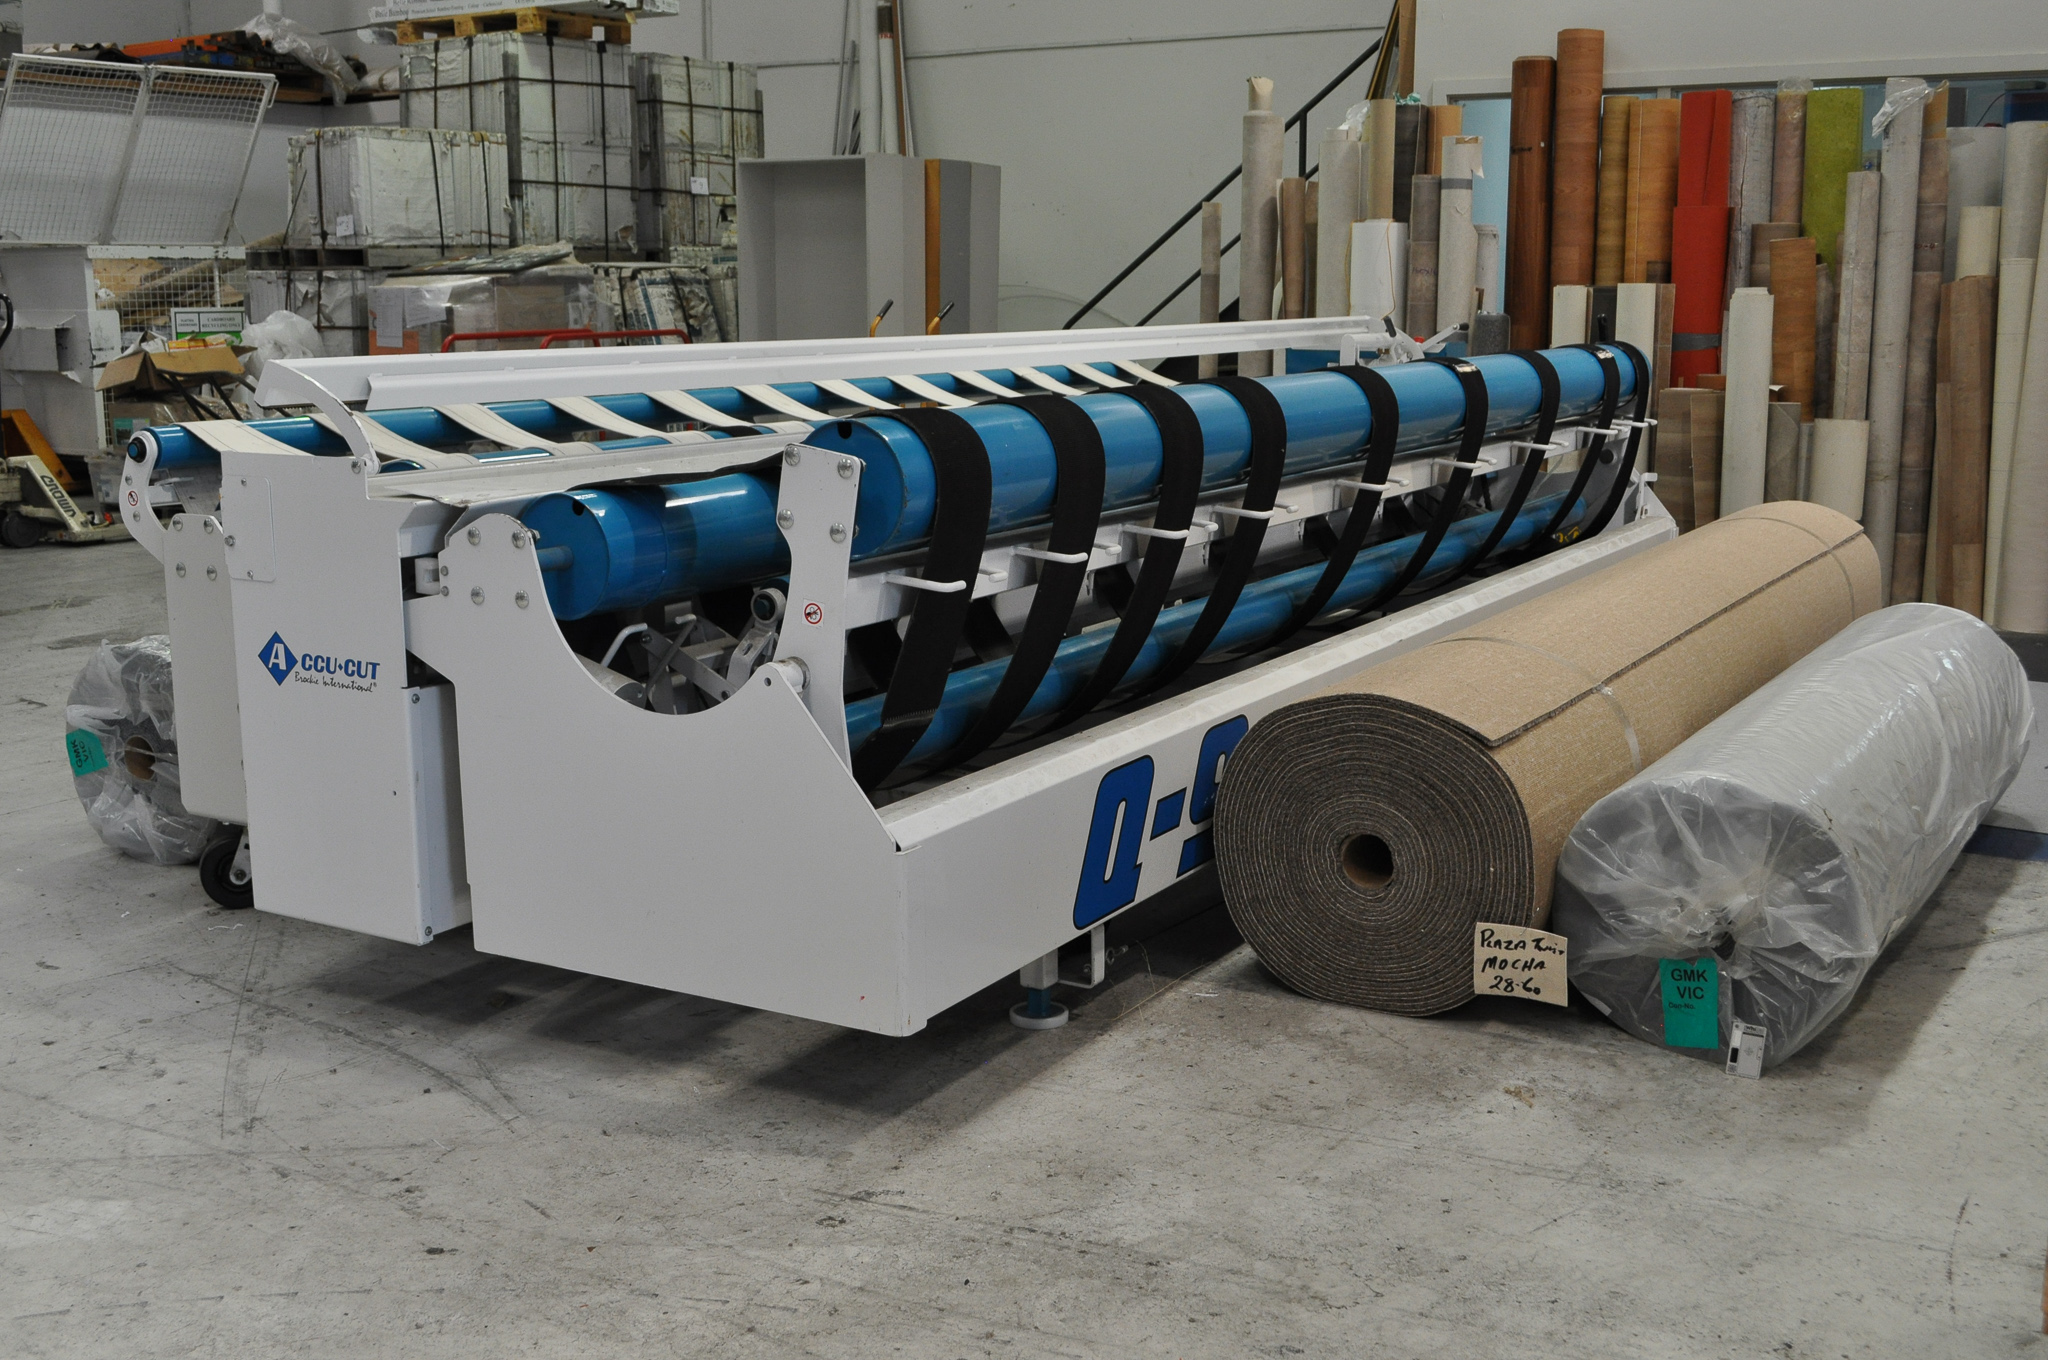 a carpet cutting machine with 2 rolls of carpet next to it ready to be cut, and installed by Concord floors, in a Concord floors warehouse.